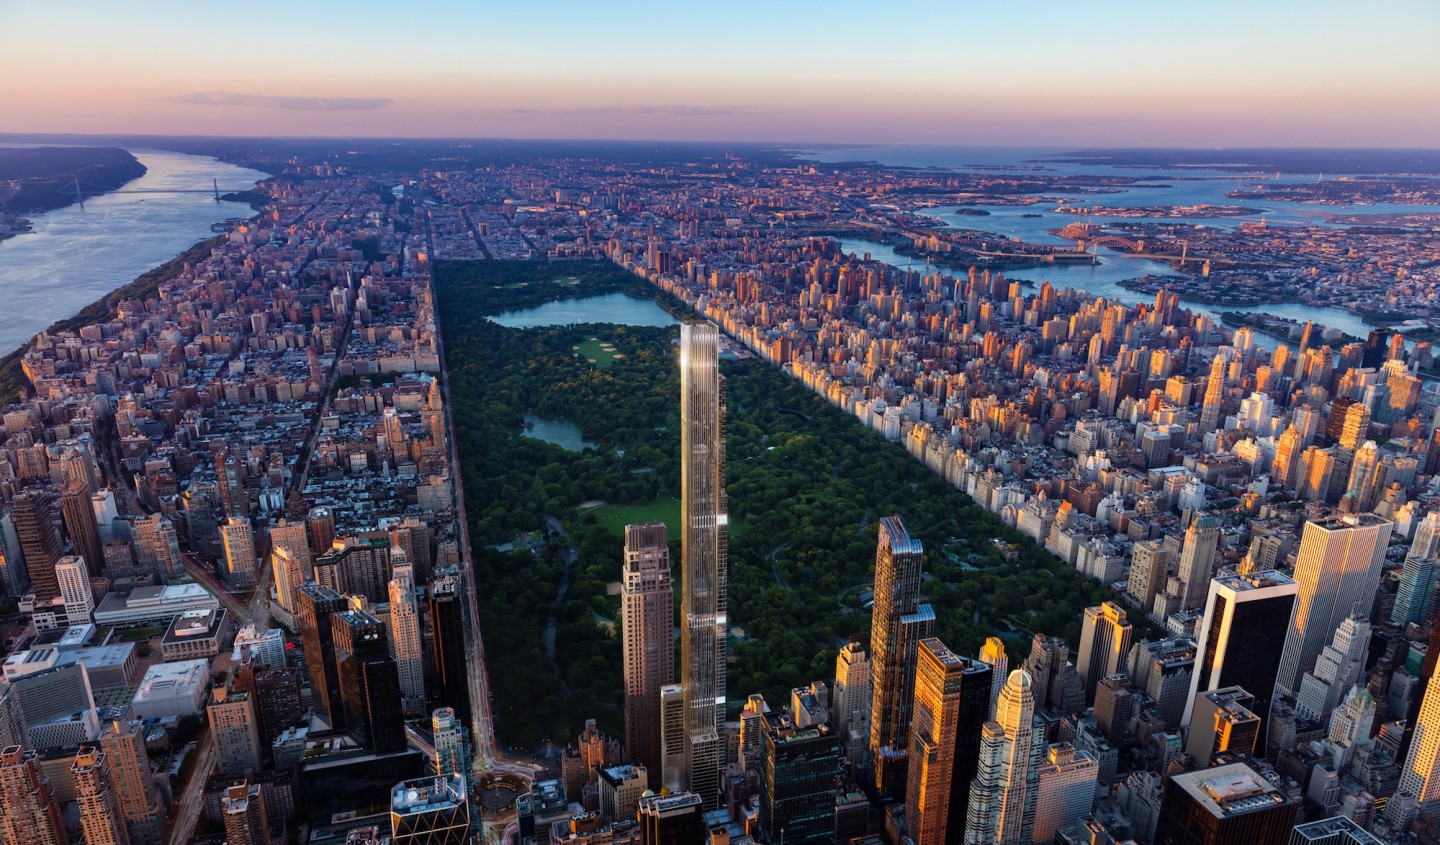 Central Park Tower overlooks New York City's Central Park and rises to a height of 472 m (1,550 ft)